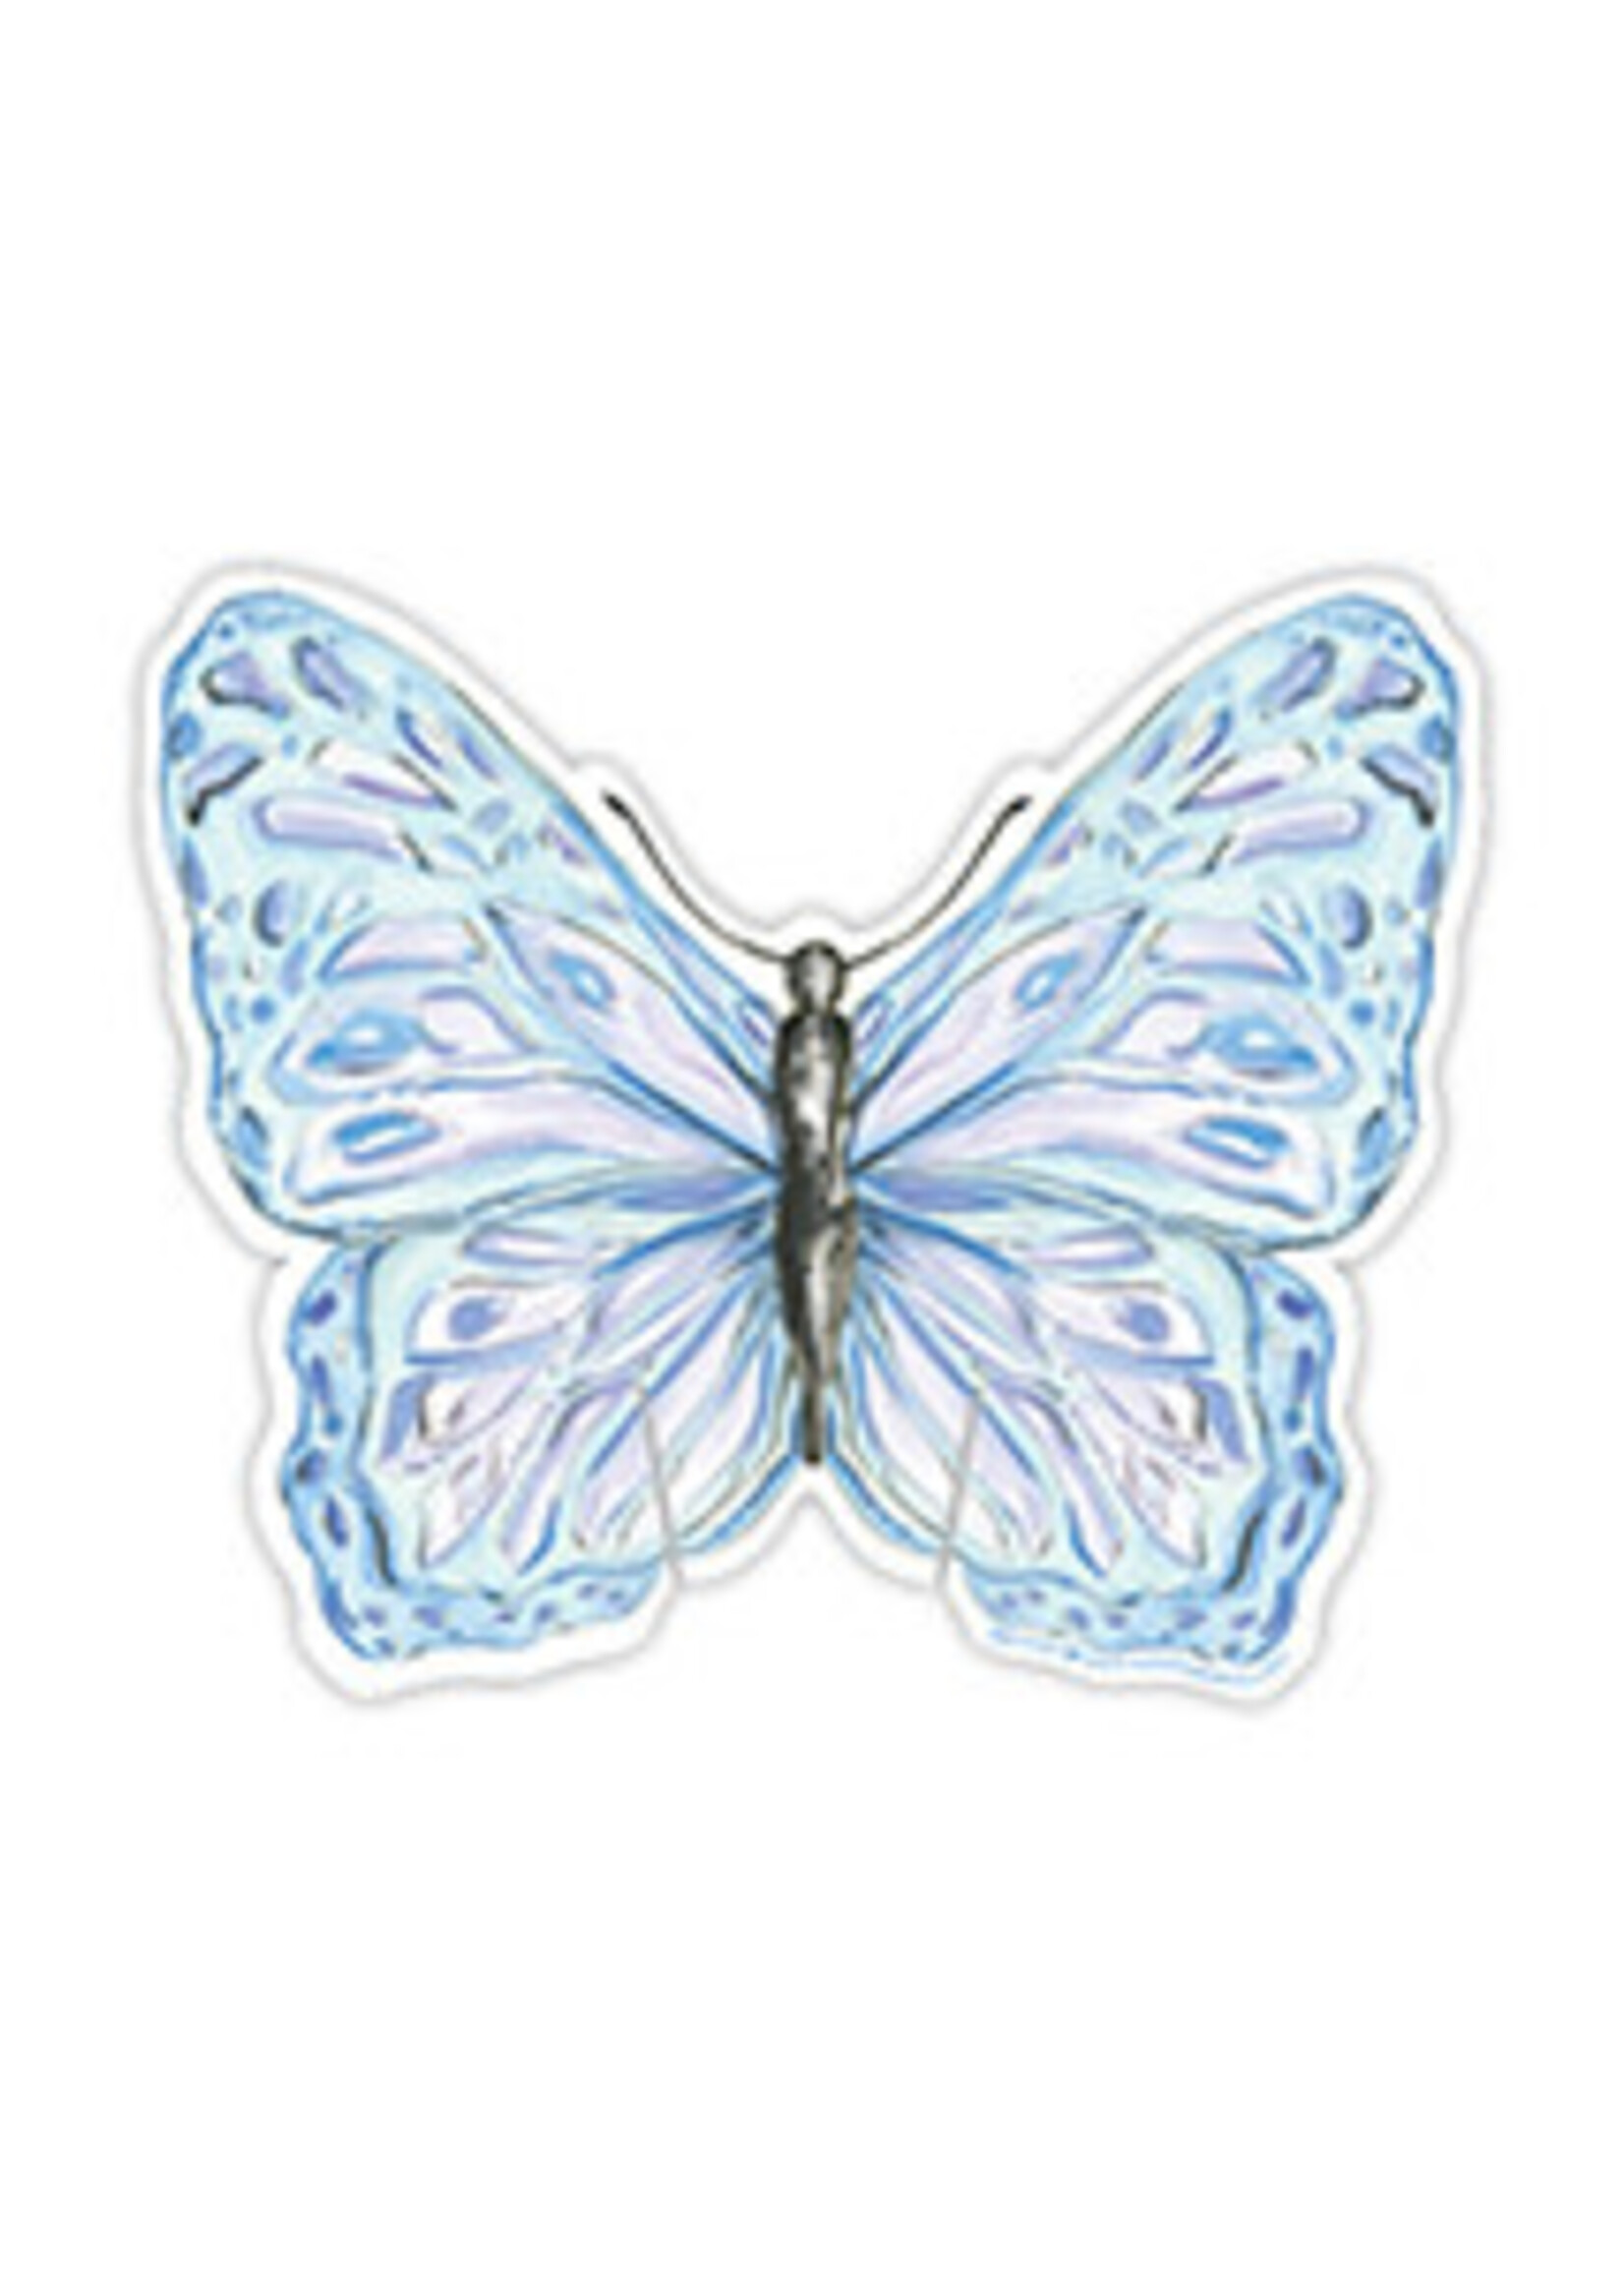 Rosanne Beck Cup Accent Blue Butterfly 047-0101